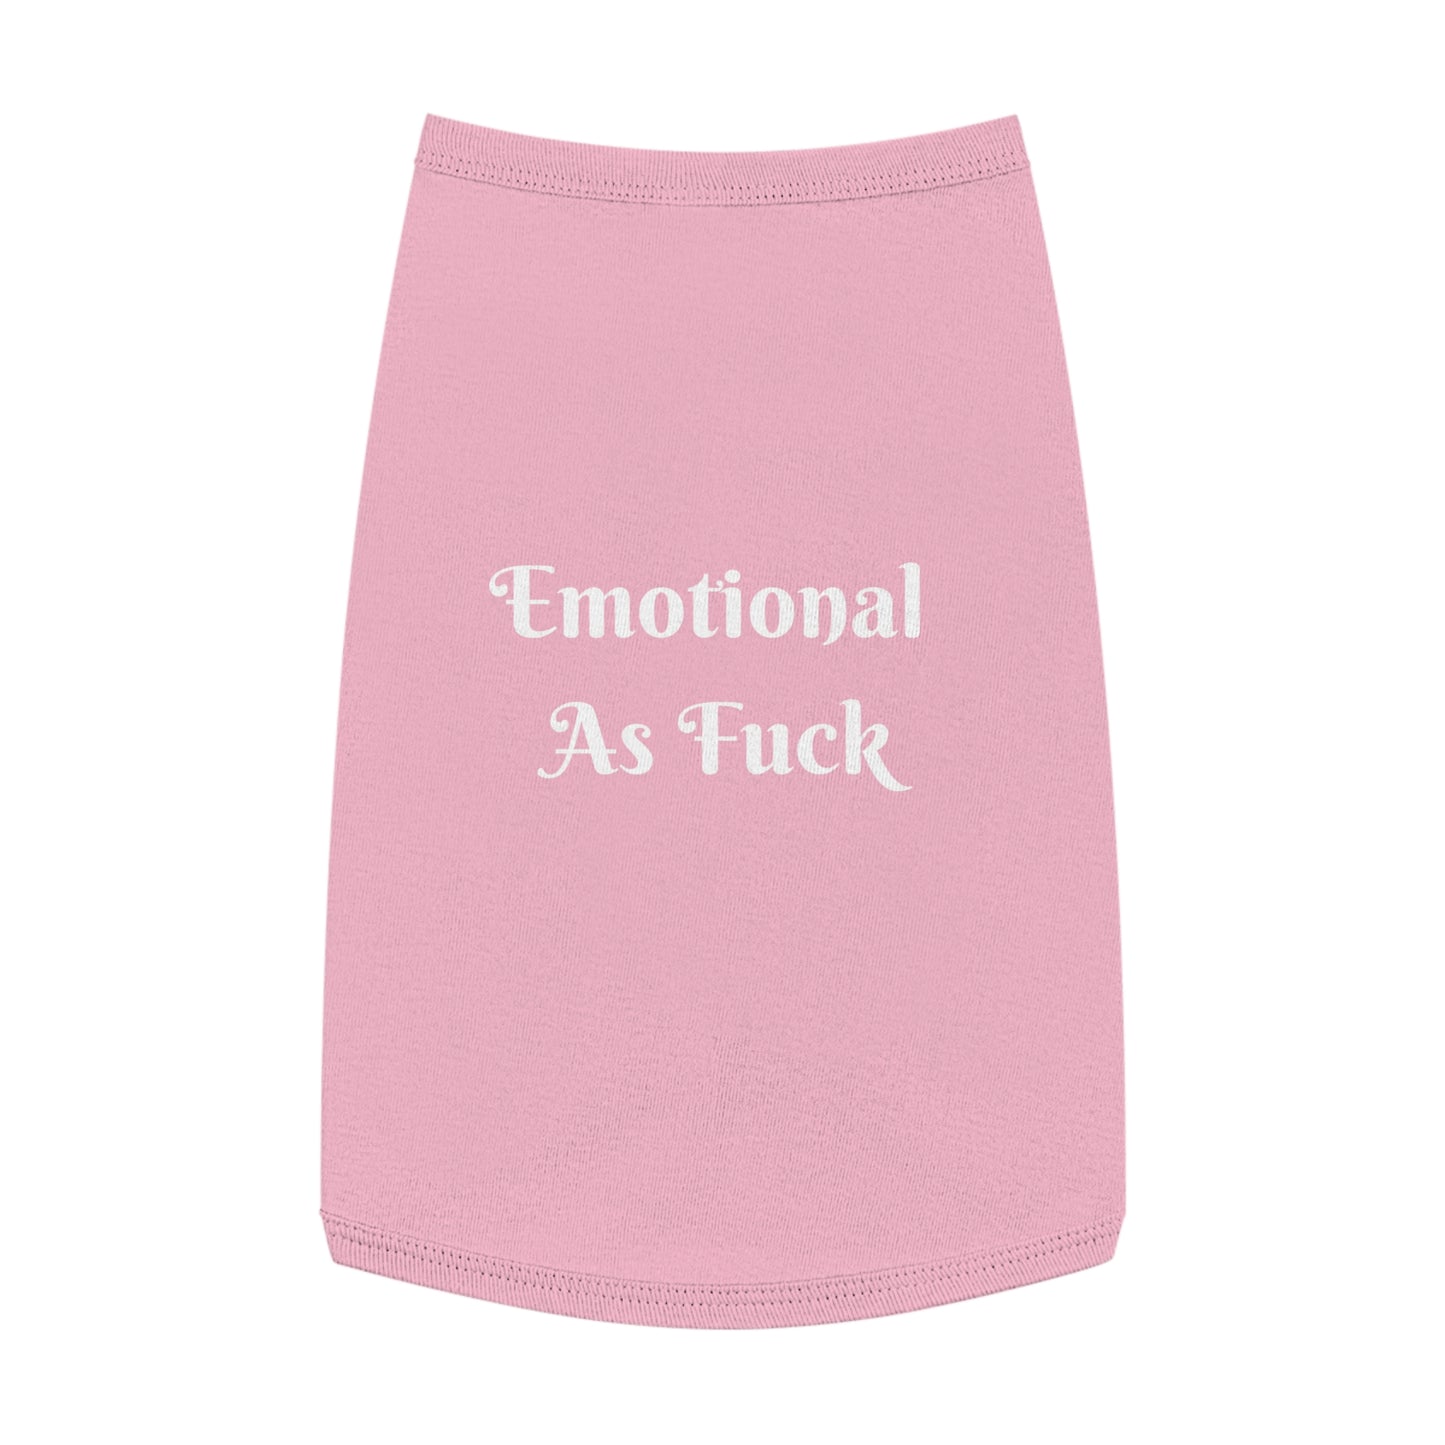 Emotional as Fuck Pet Tank Top - Let Your Pet Express Their Feelings